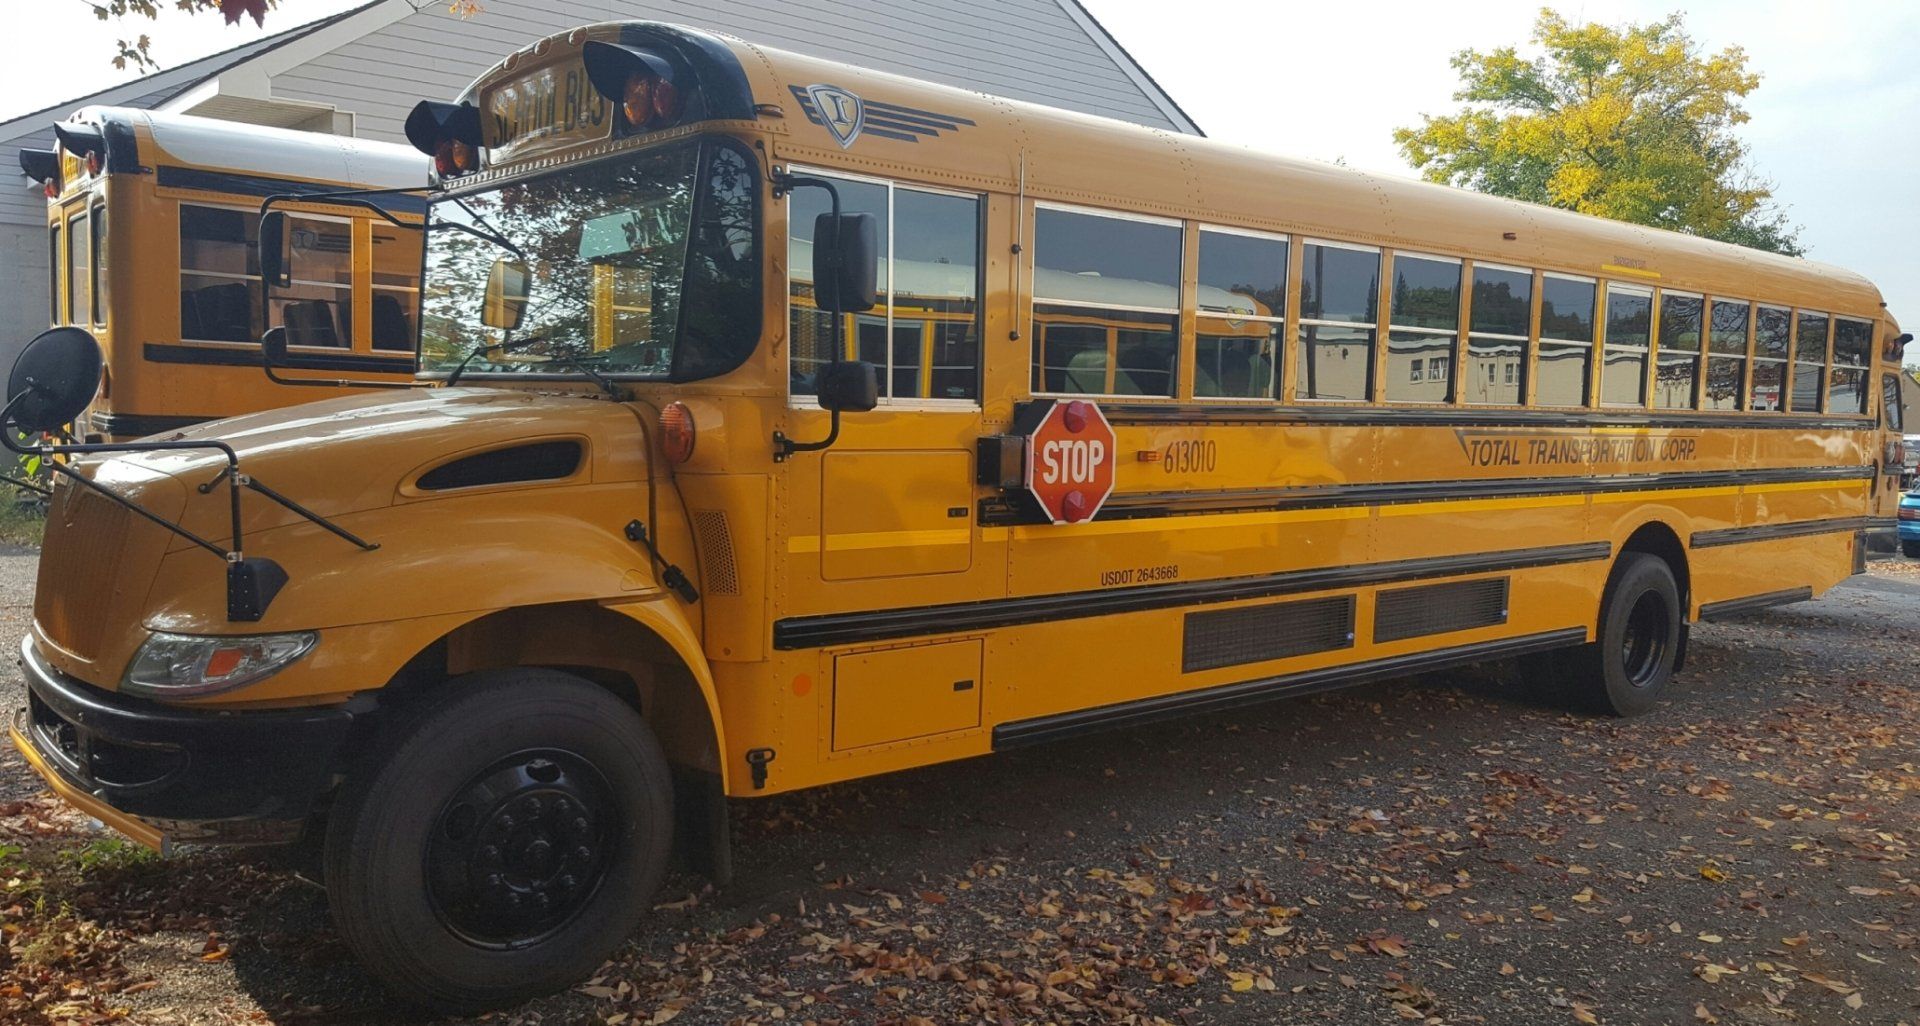 School Bus — Alarm in West Chester, PA